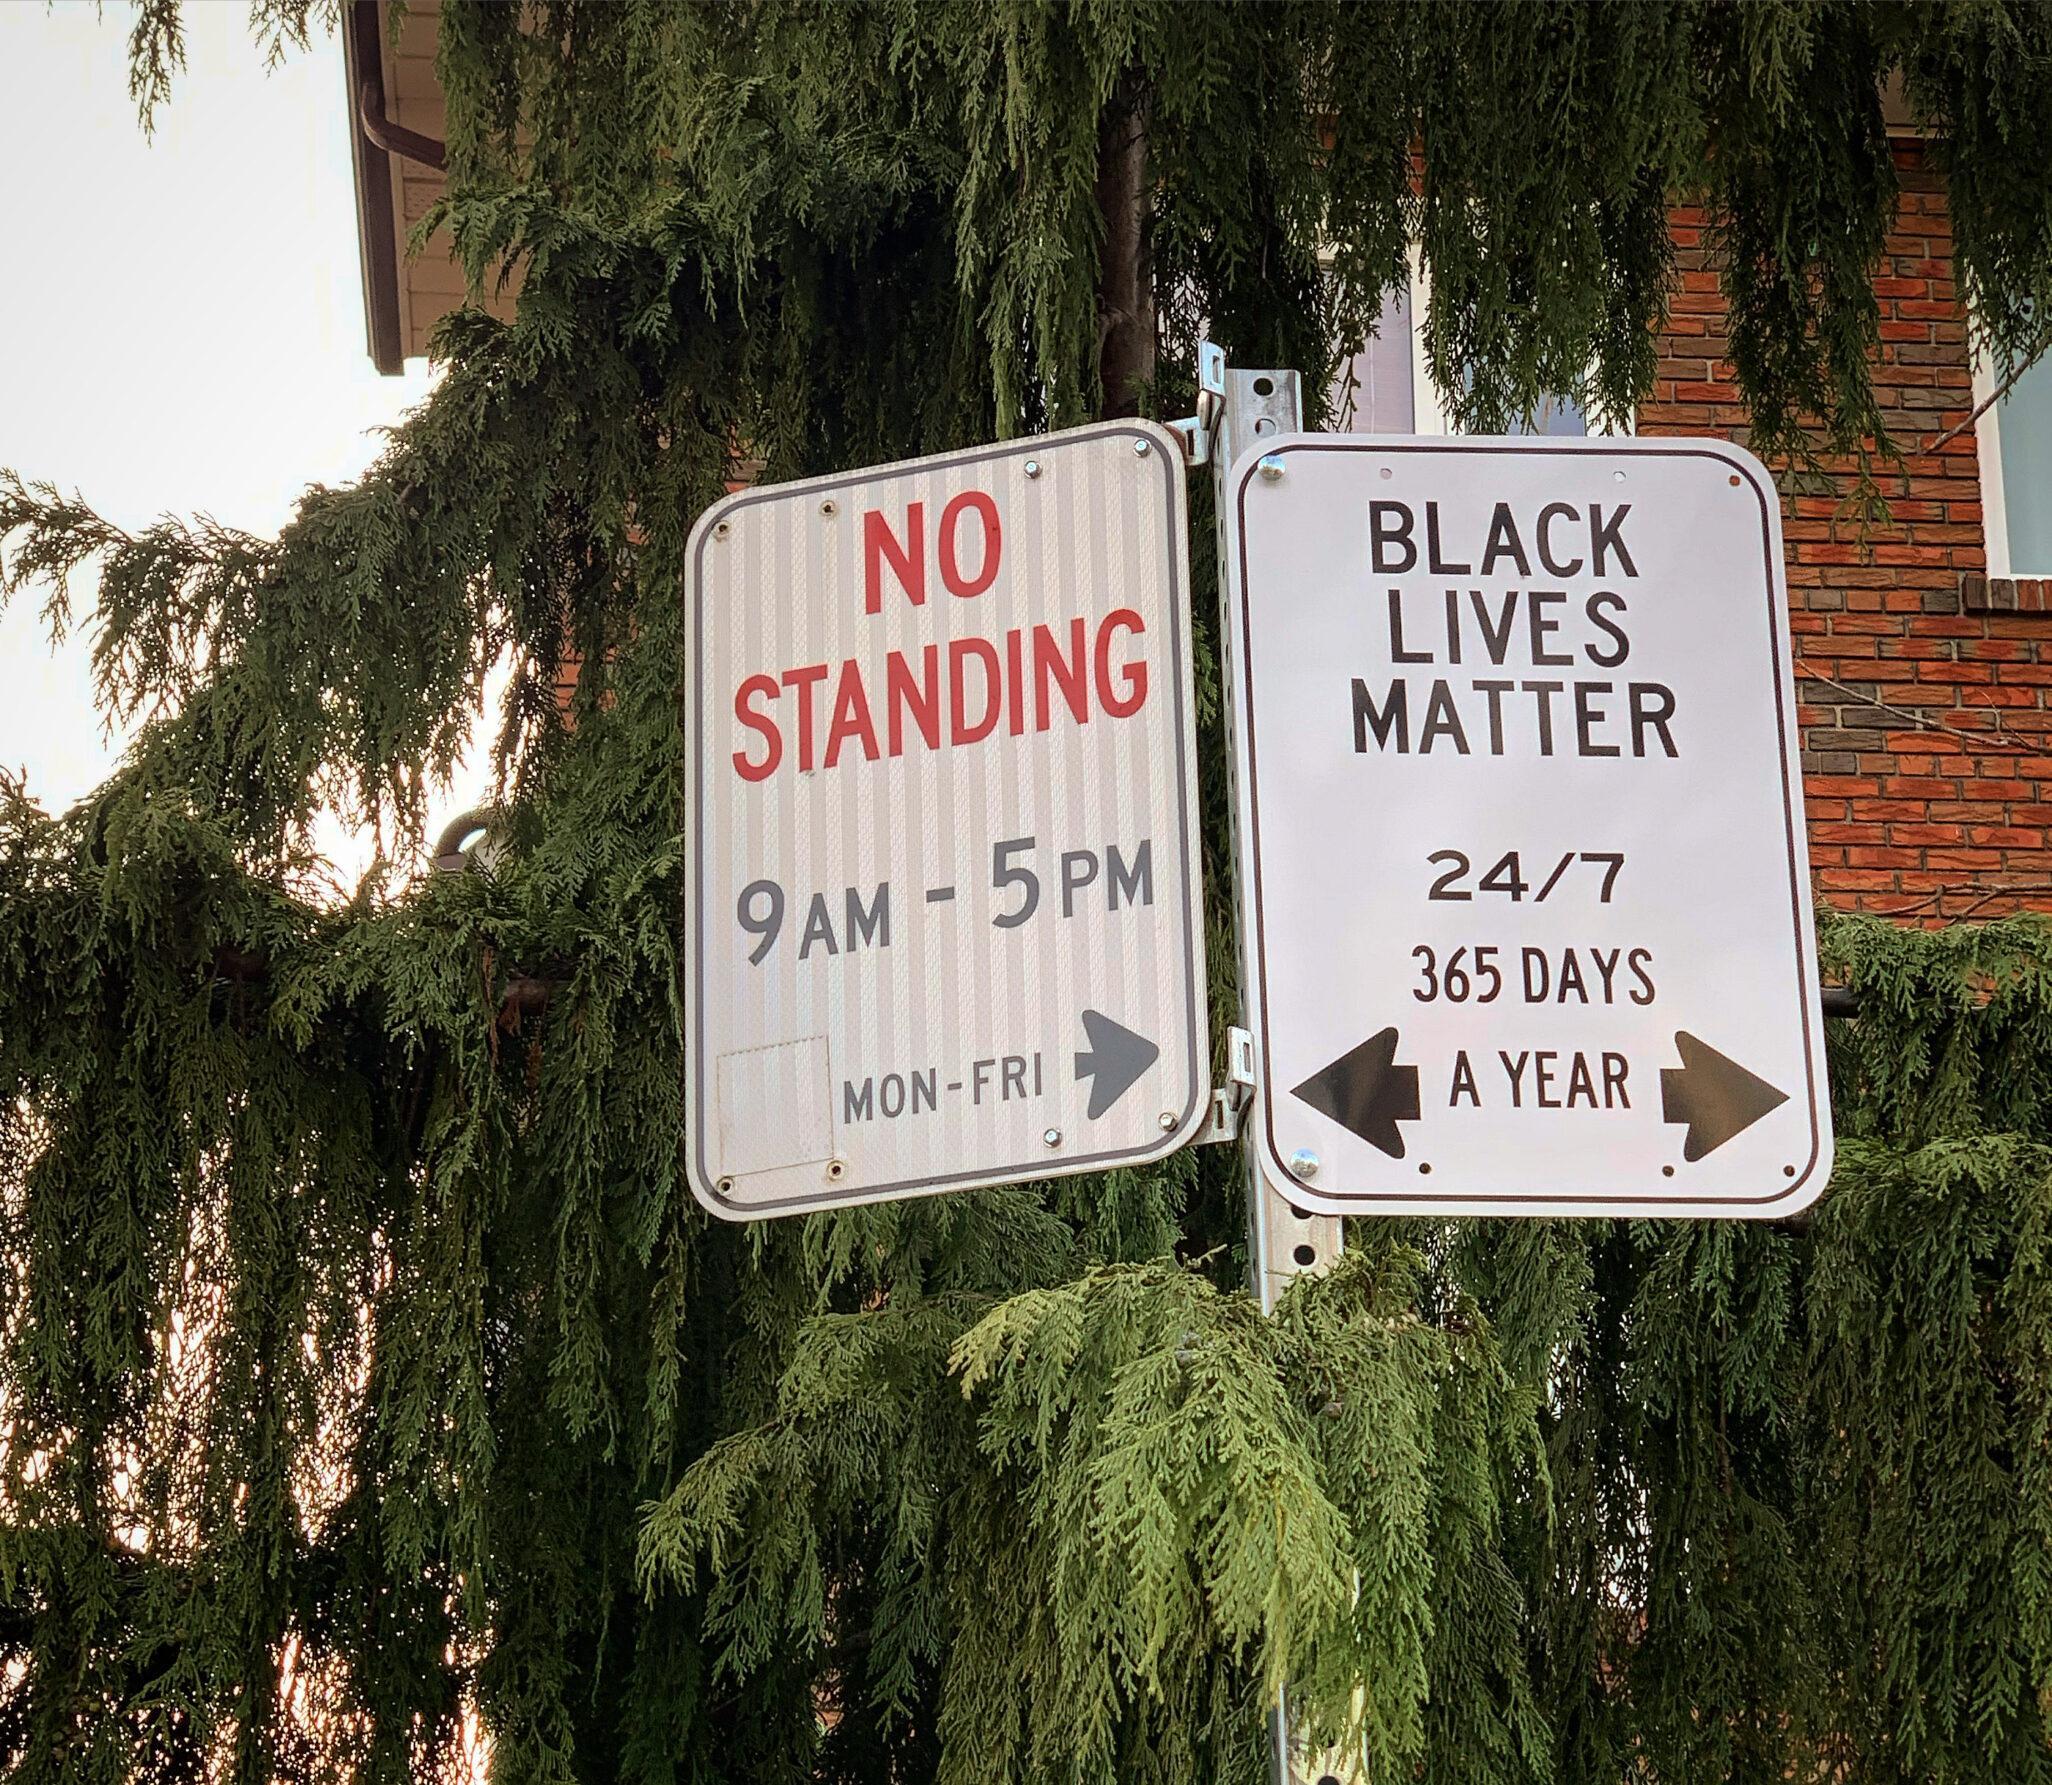 Black Lives Matter sign beside a typical "No Standing" traffic sign.